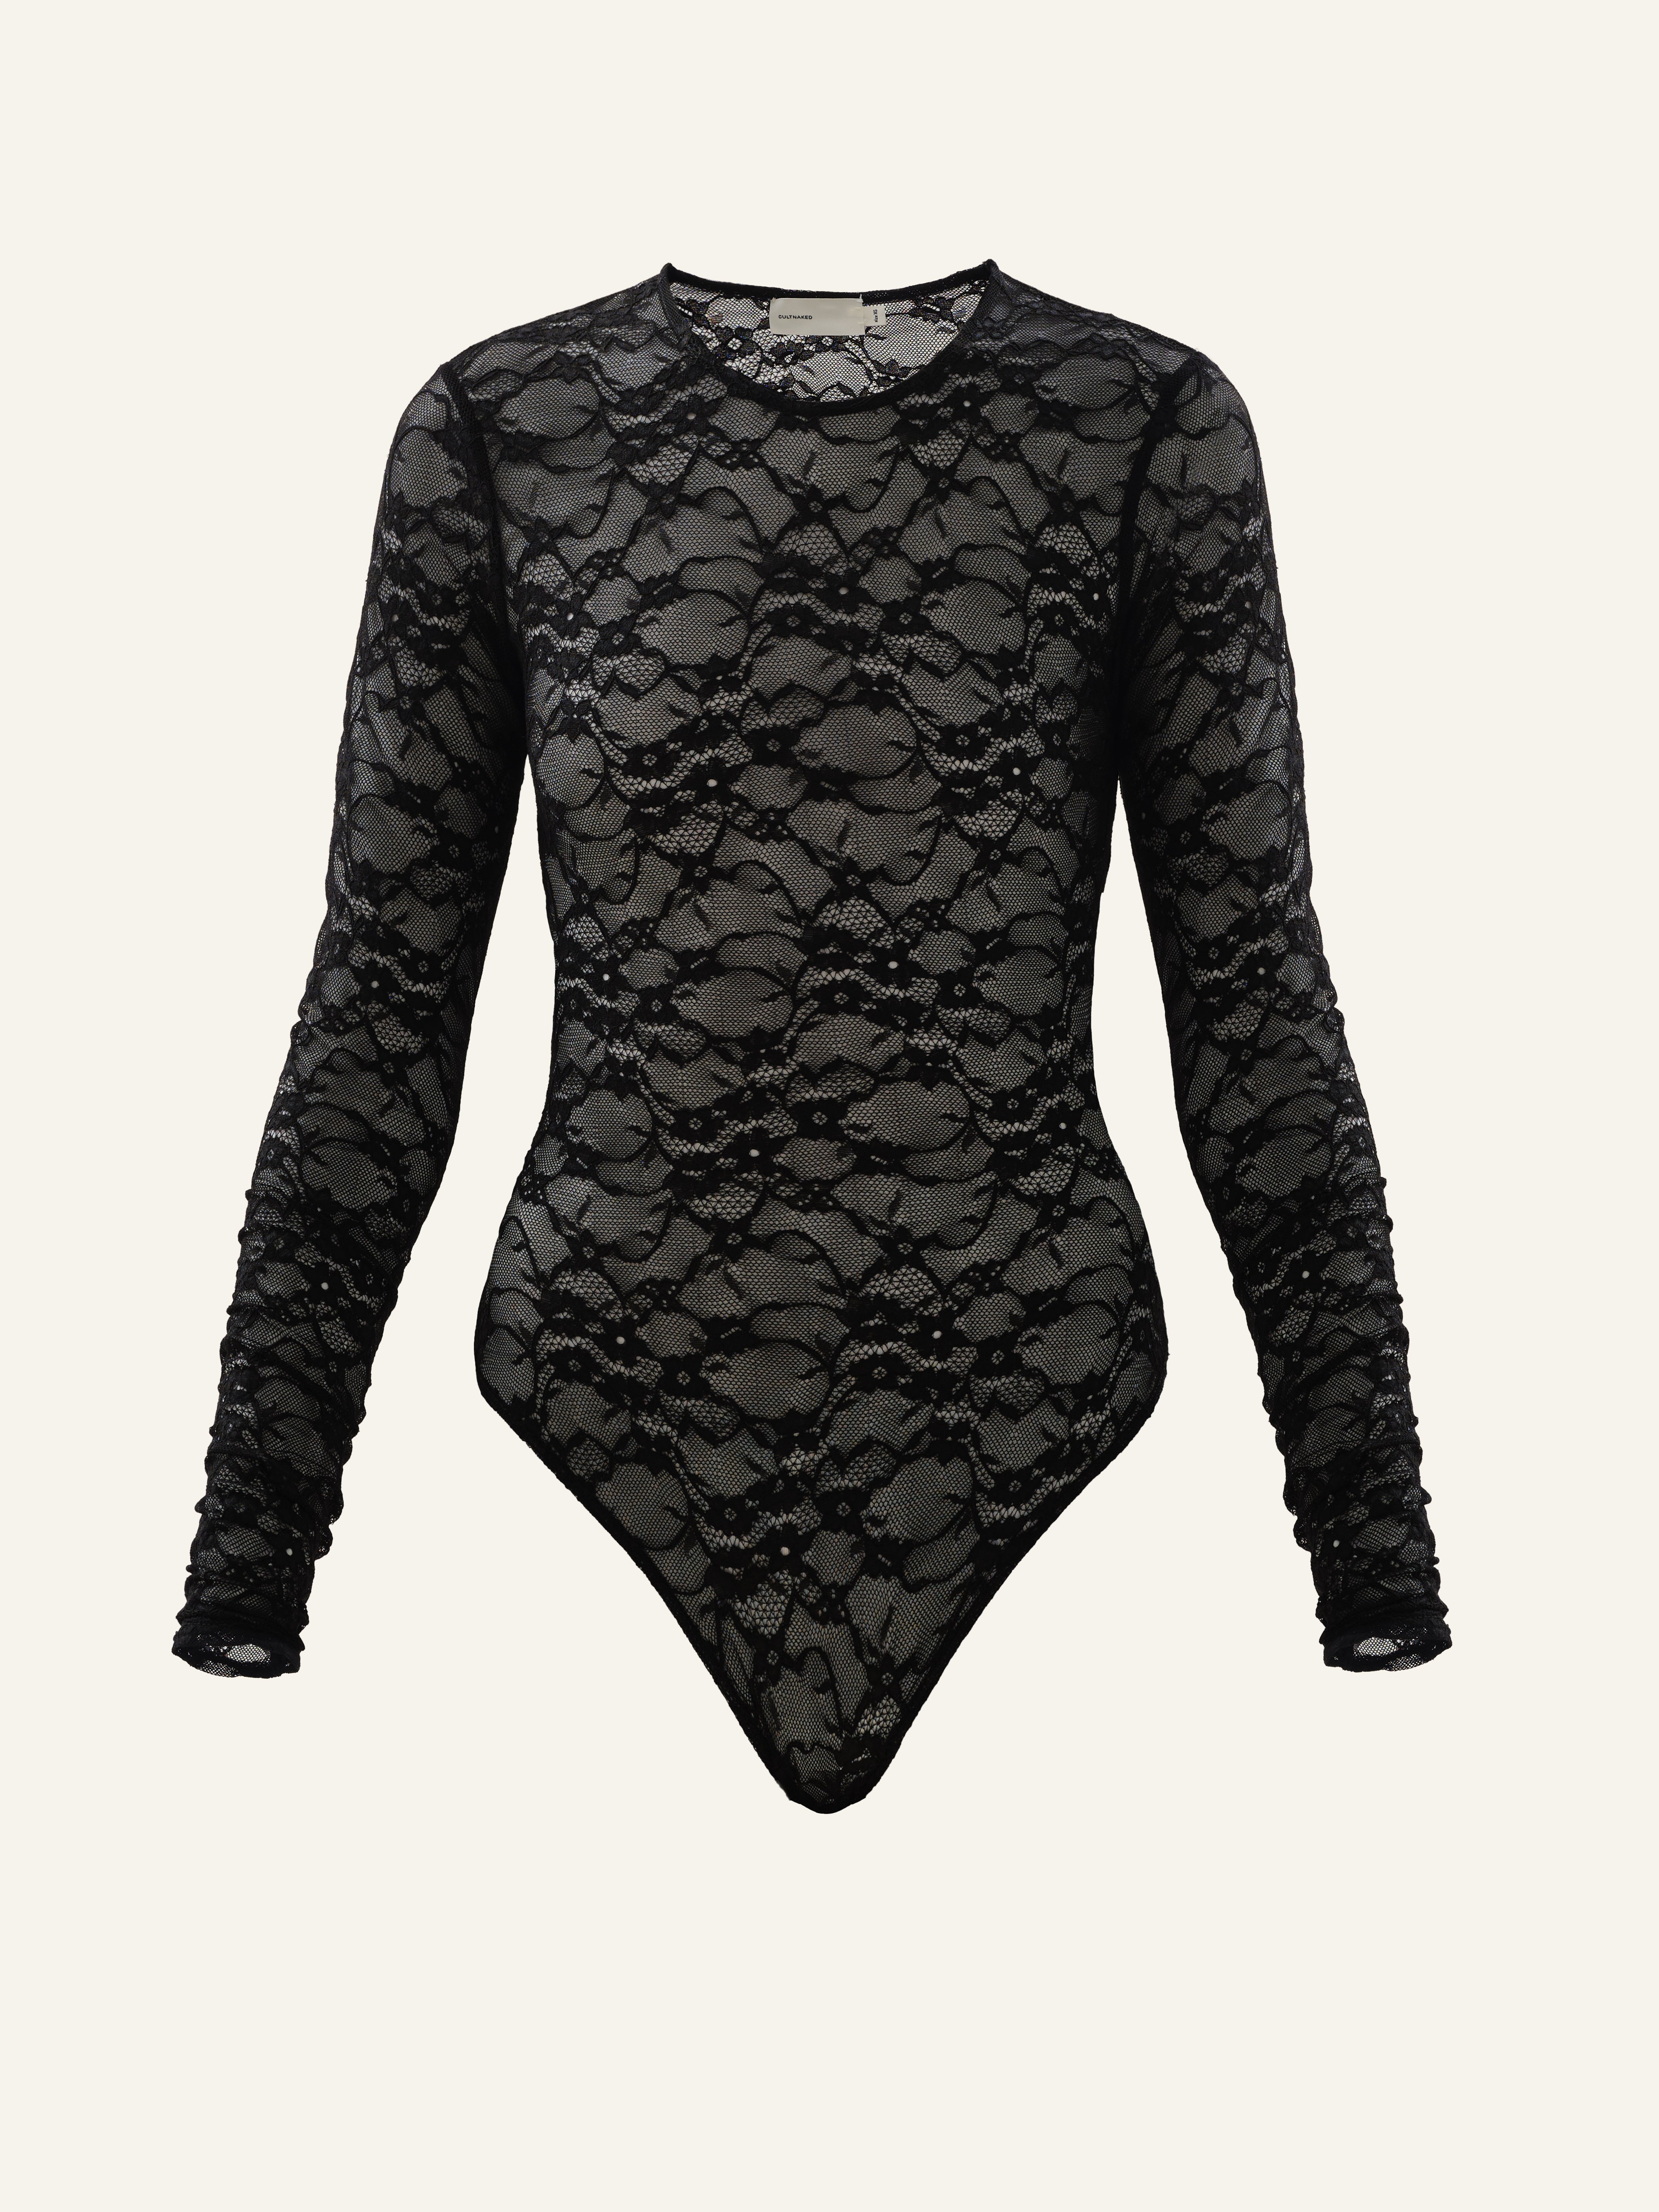 Product photo of a black lace long sleeved bodysuit